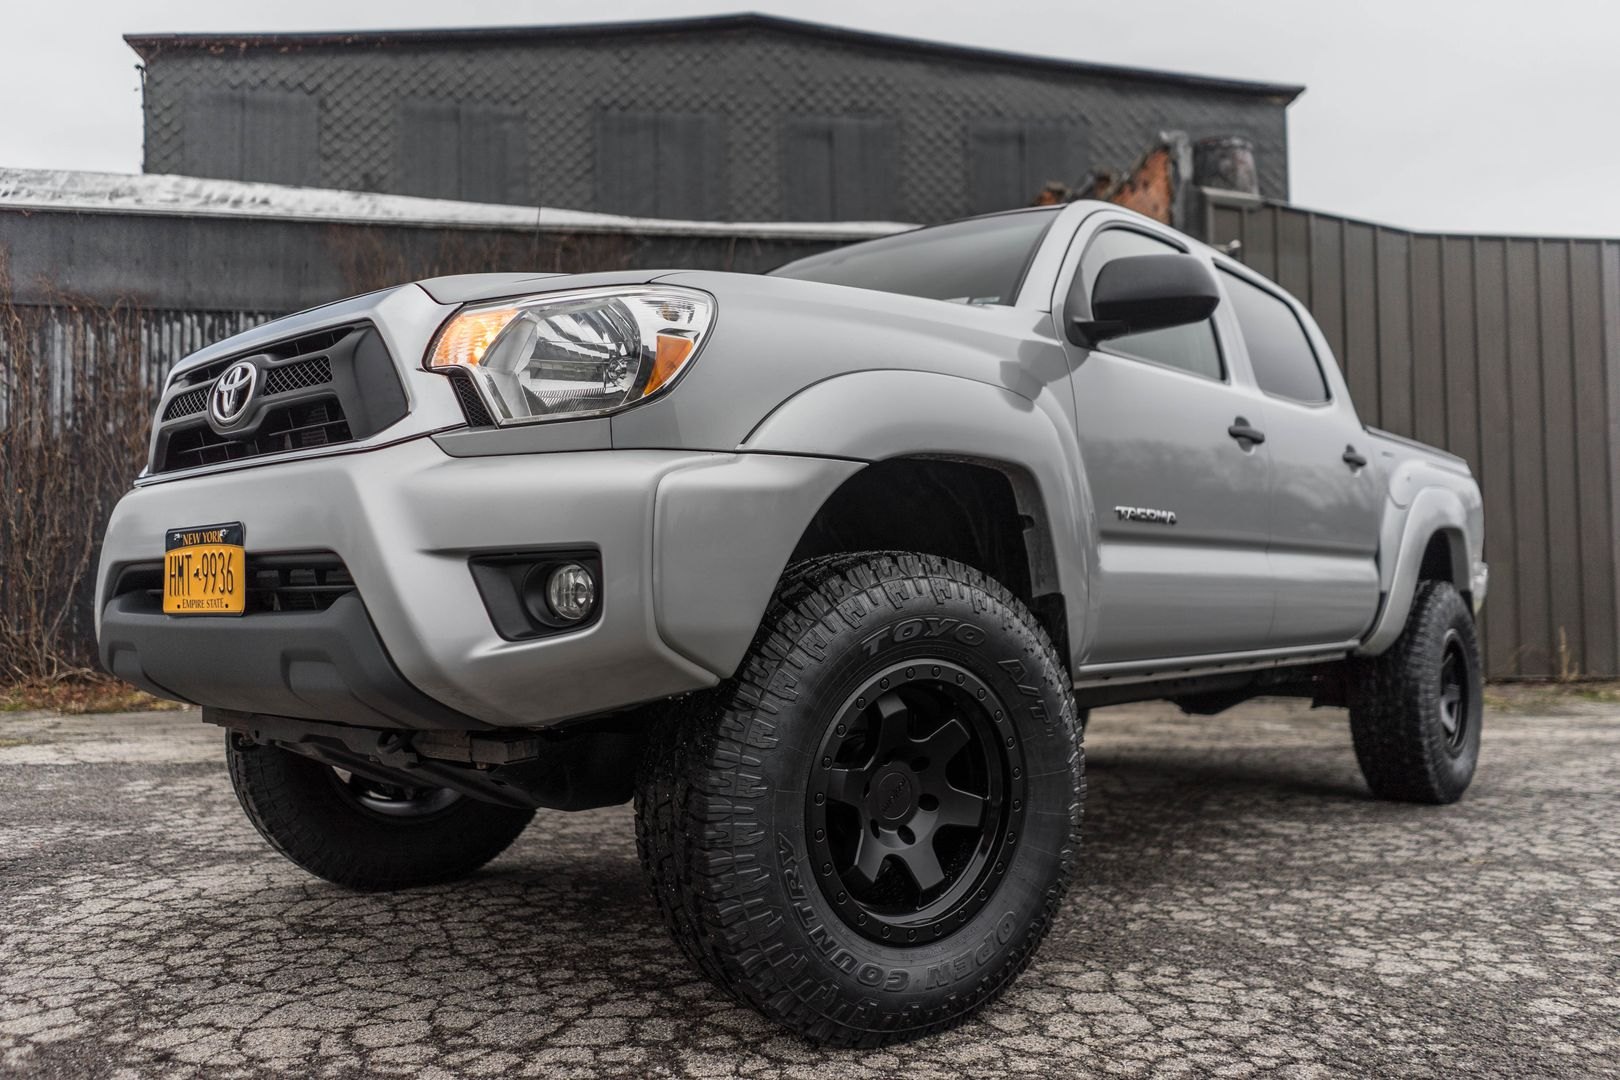 Gray Lifted Toyota Tacoma with Custom Bumper Guard - Photo by Rotiform